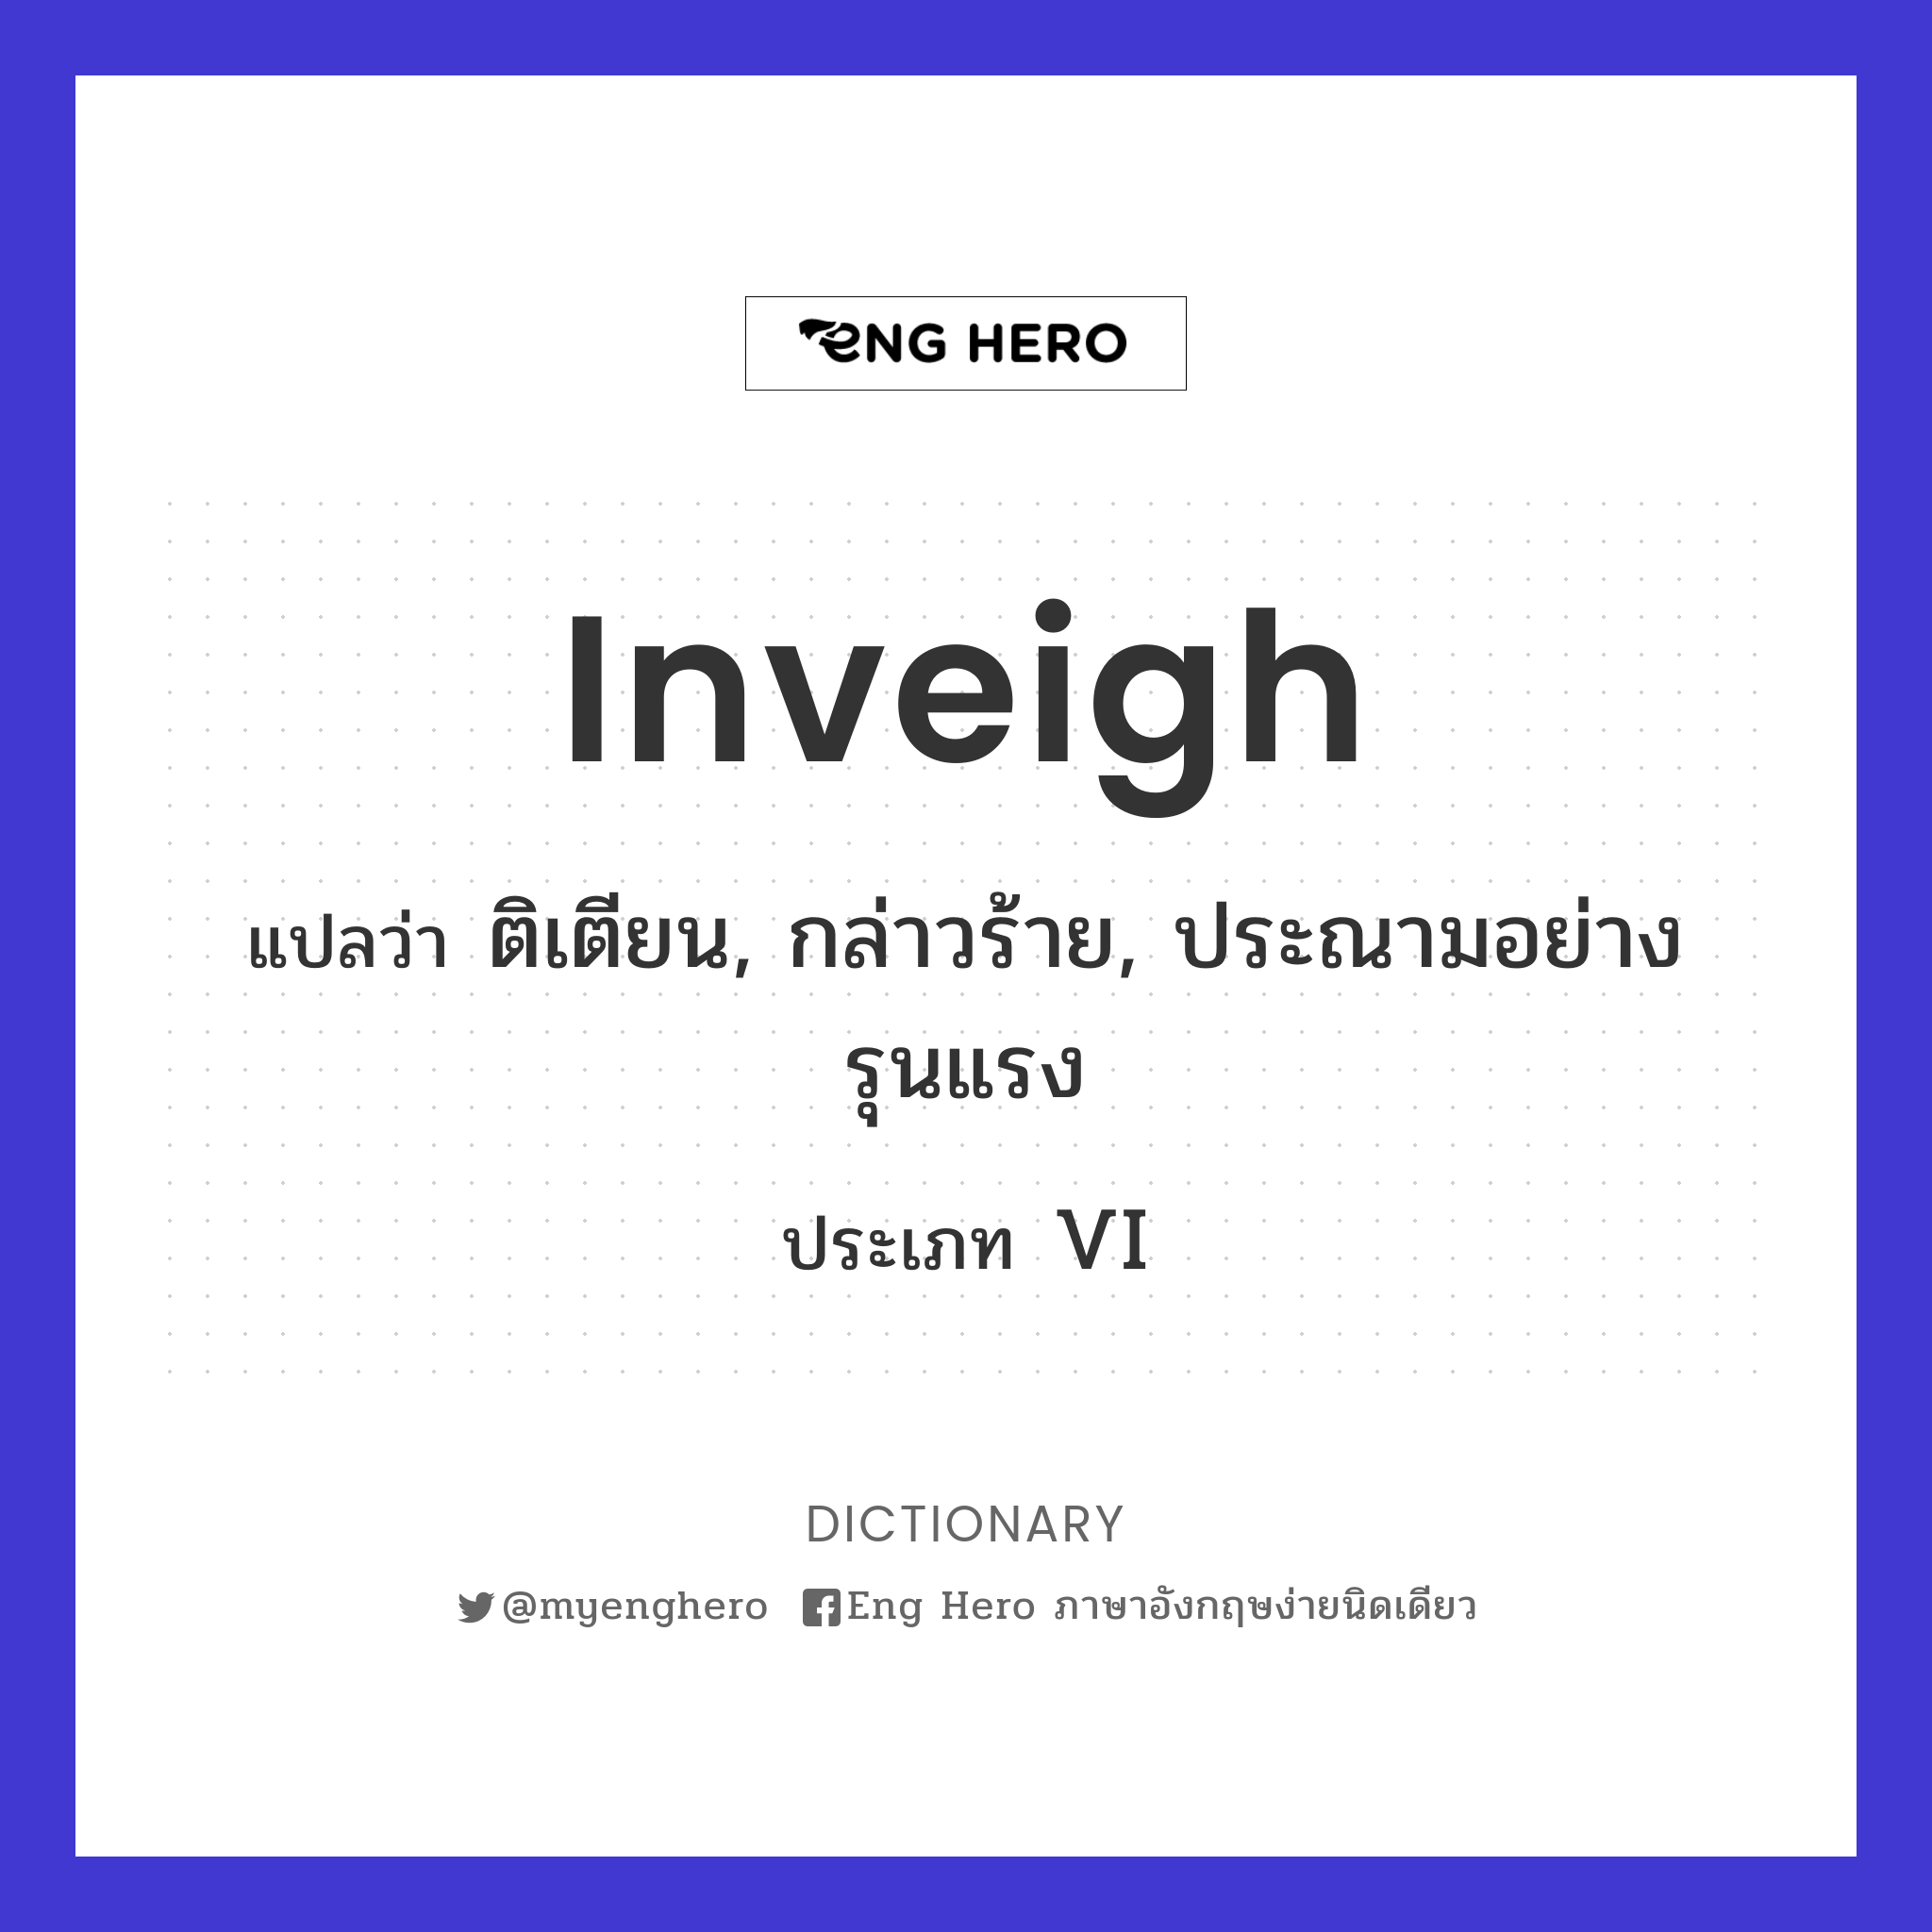 inveigh